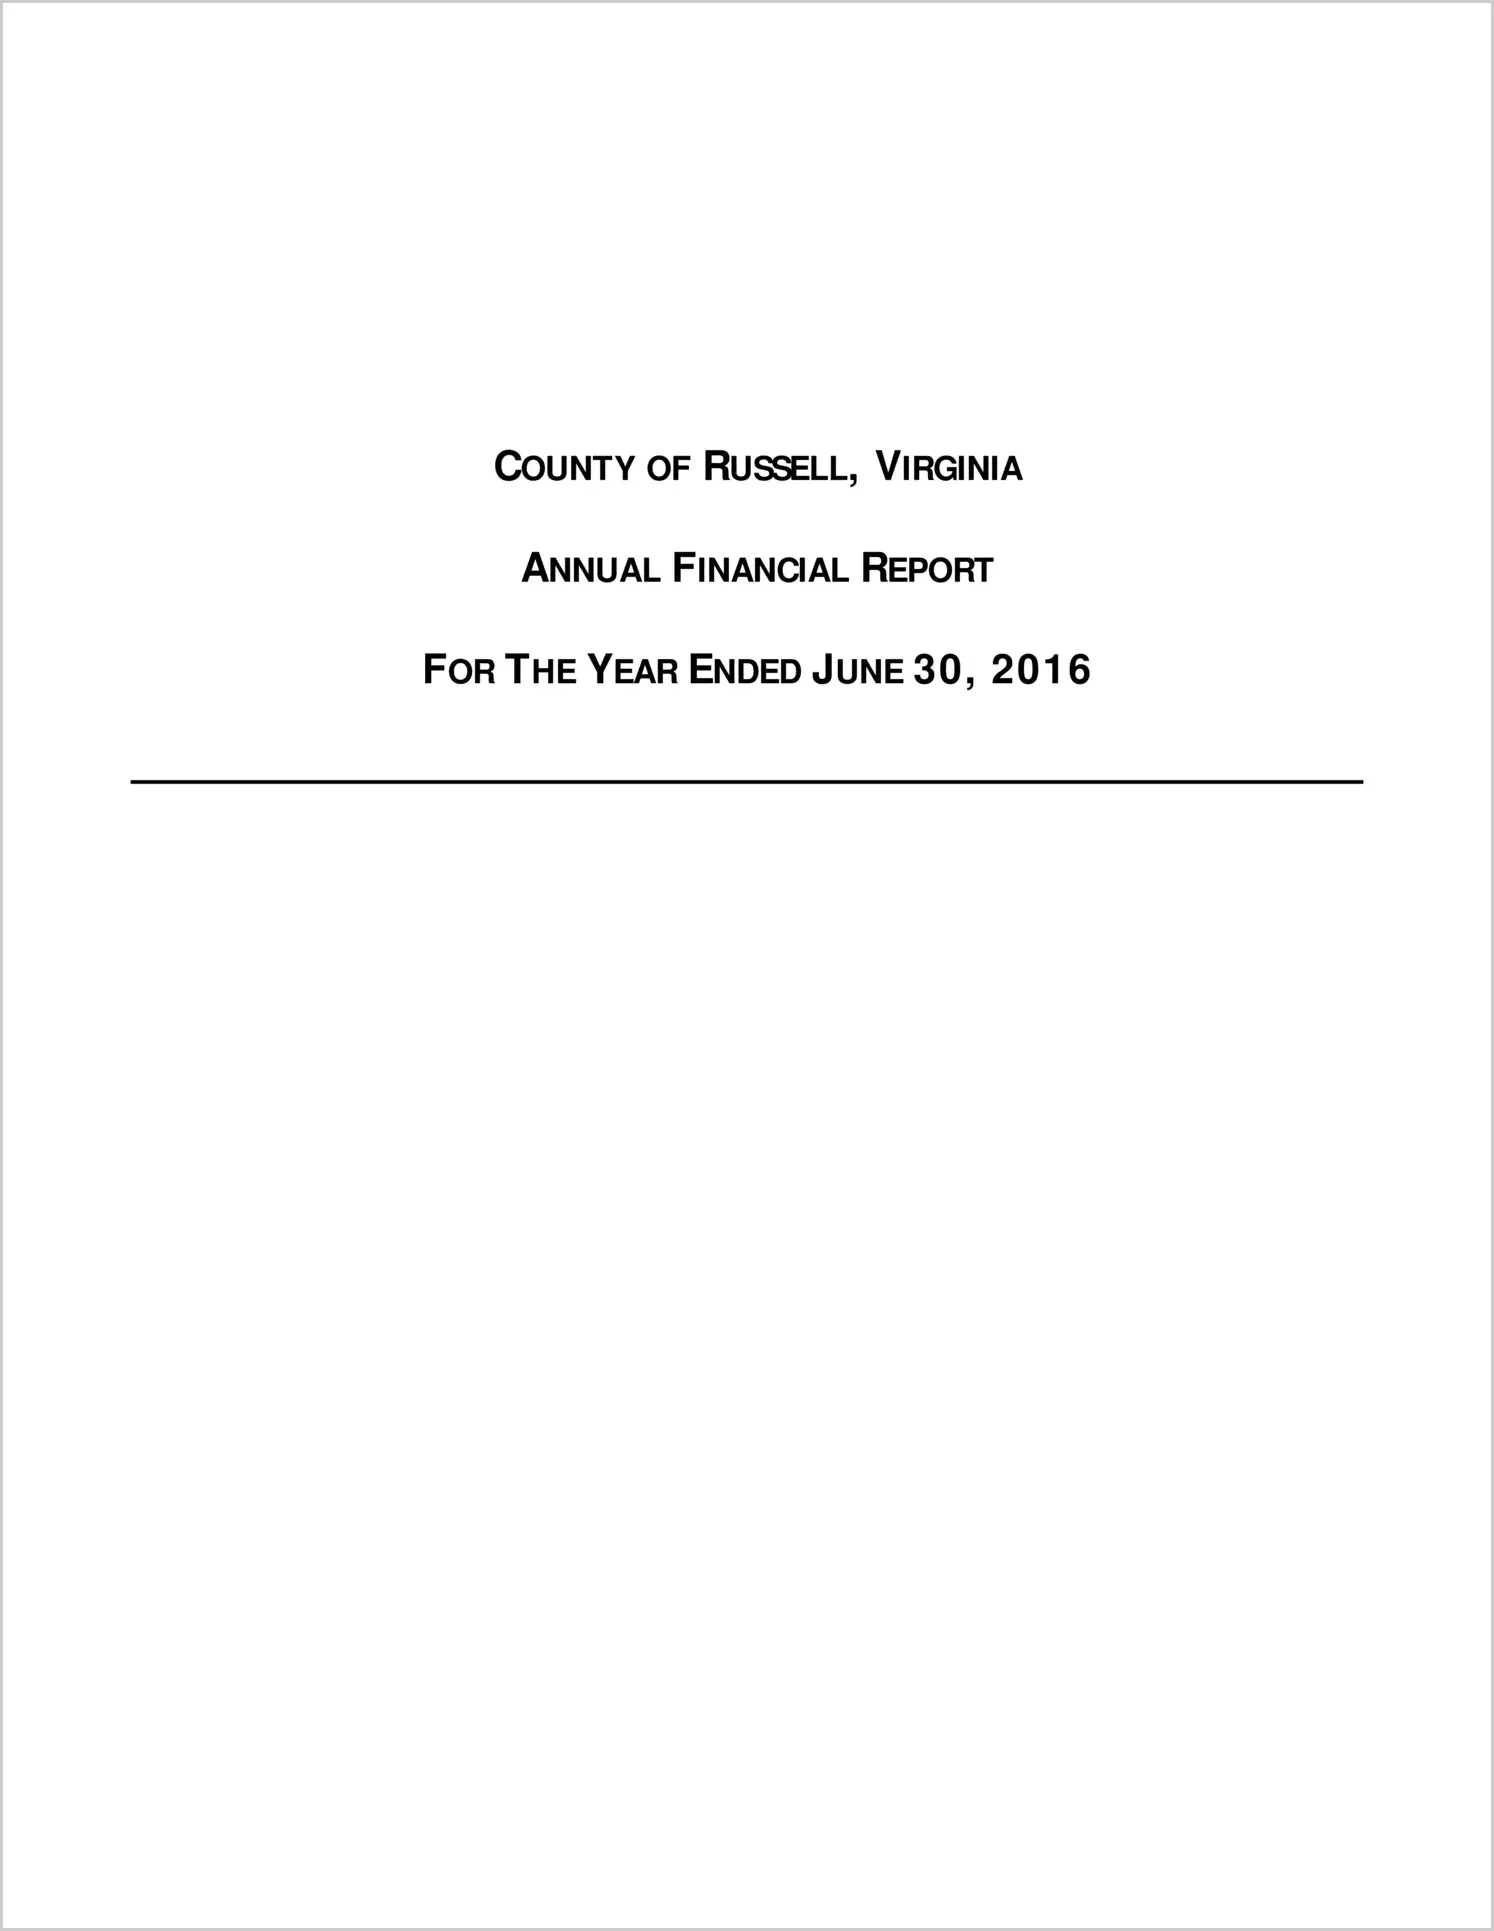 2016 Annual Financial Report for County of Russell